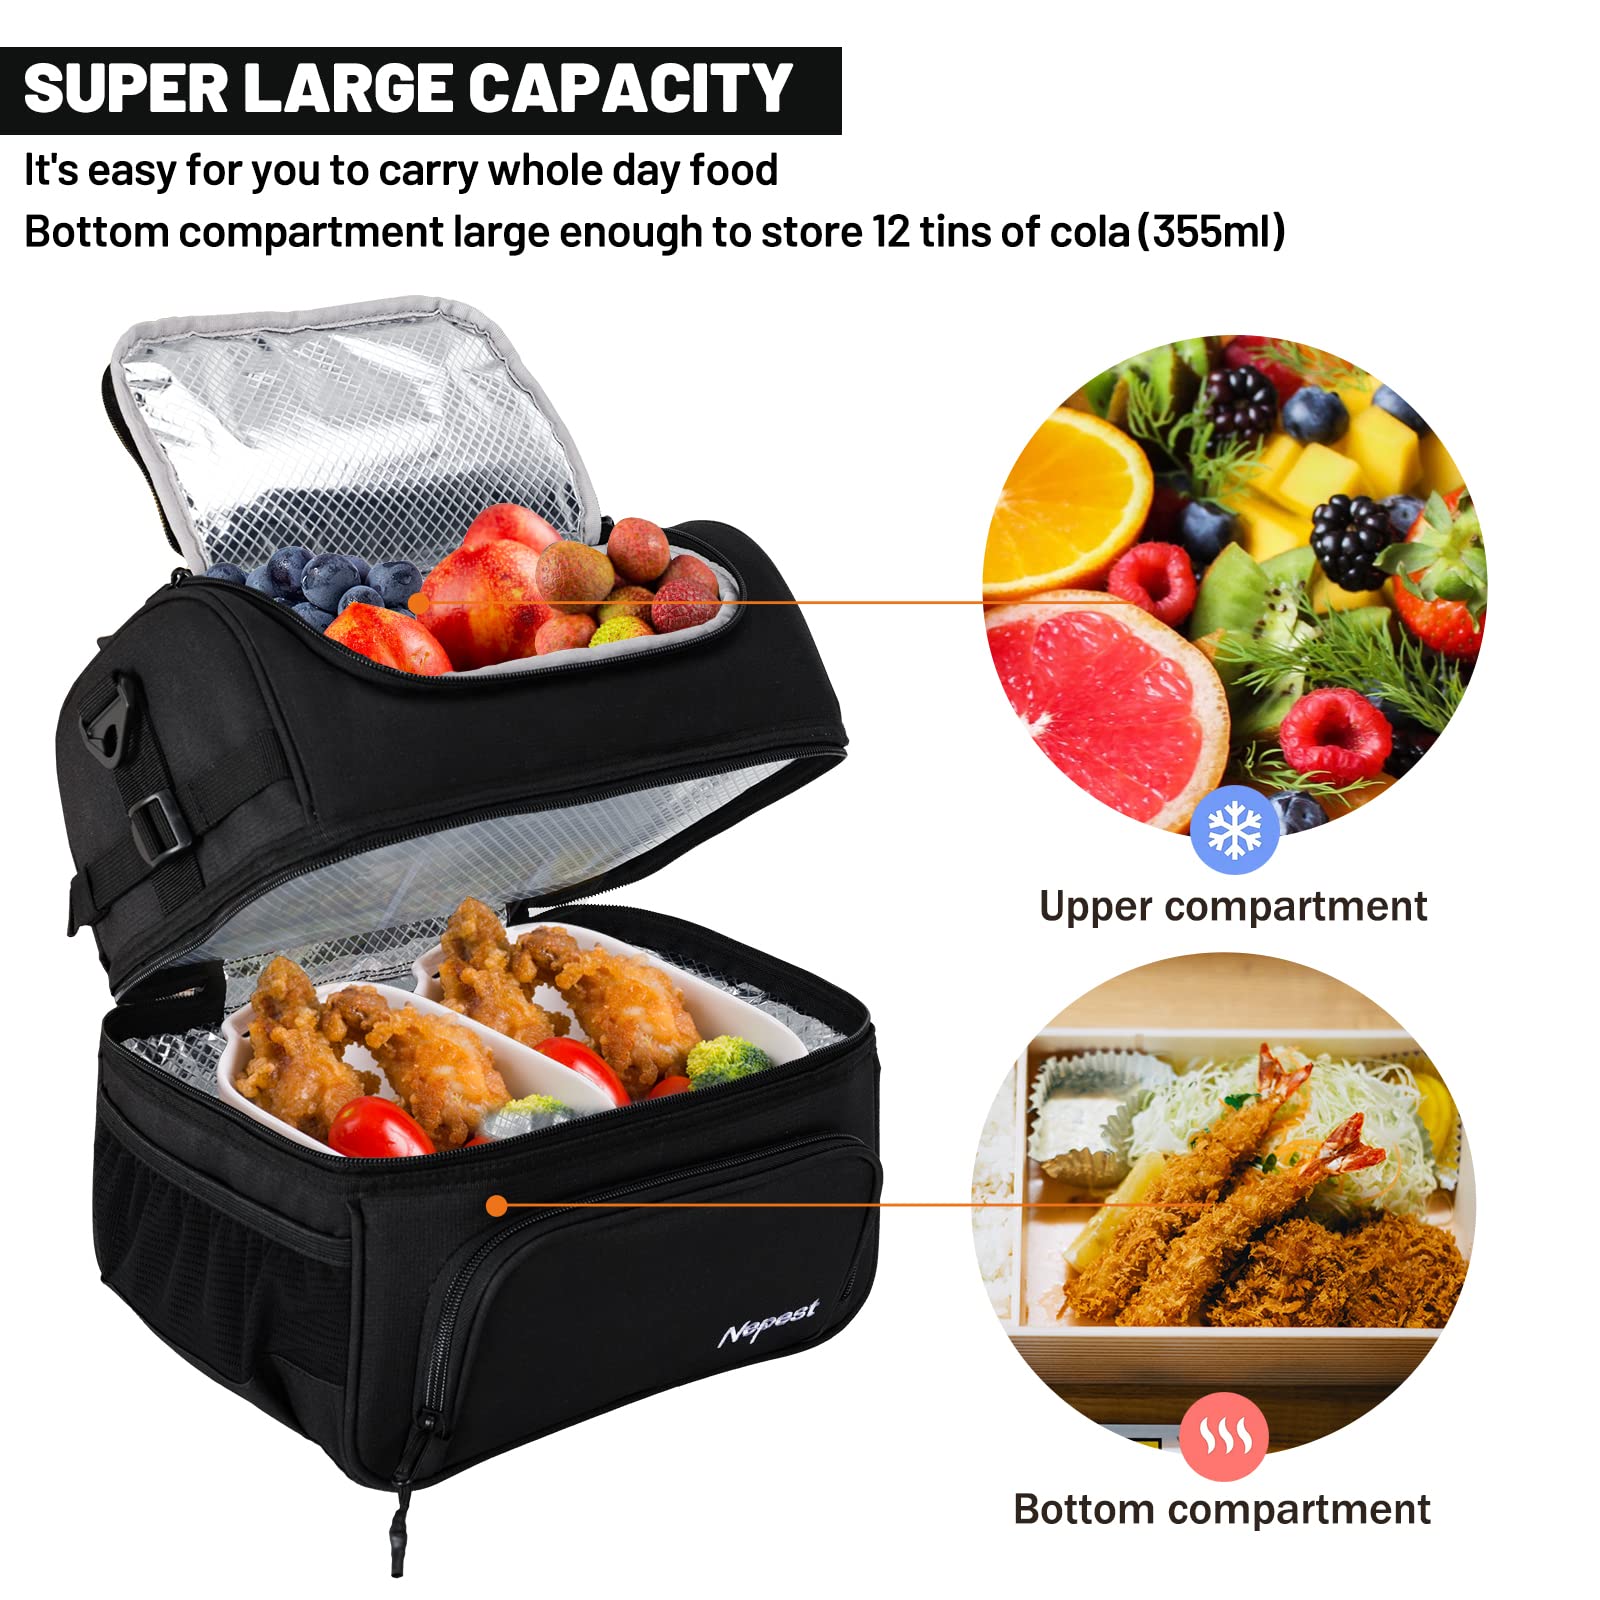 Nepest Large Insulated Lunch Cooler Bag for Adult Men Women 24 Can Heavy Duty Lunch Box Reusable Lunchboxes Leakproof Lunch Pale Soft Coolers Bags with Shoulder Strap for Work Picnic Office, Dark Gray